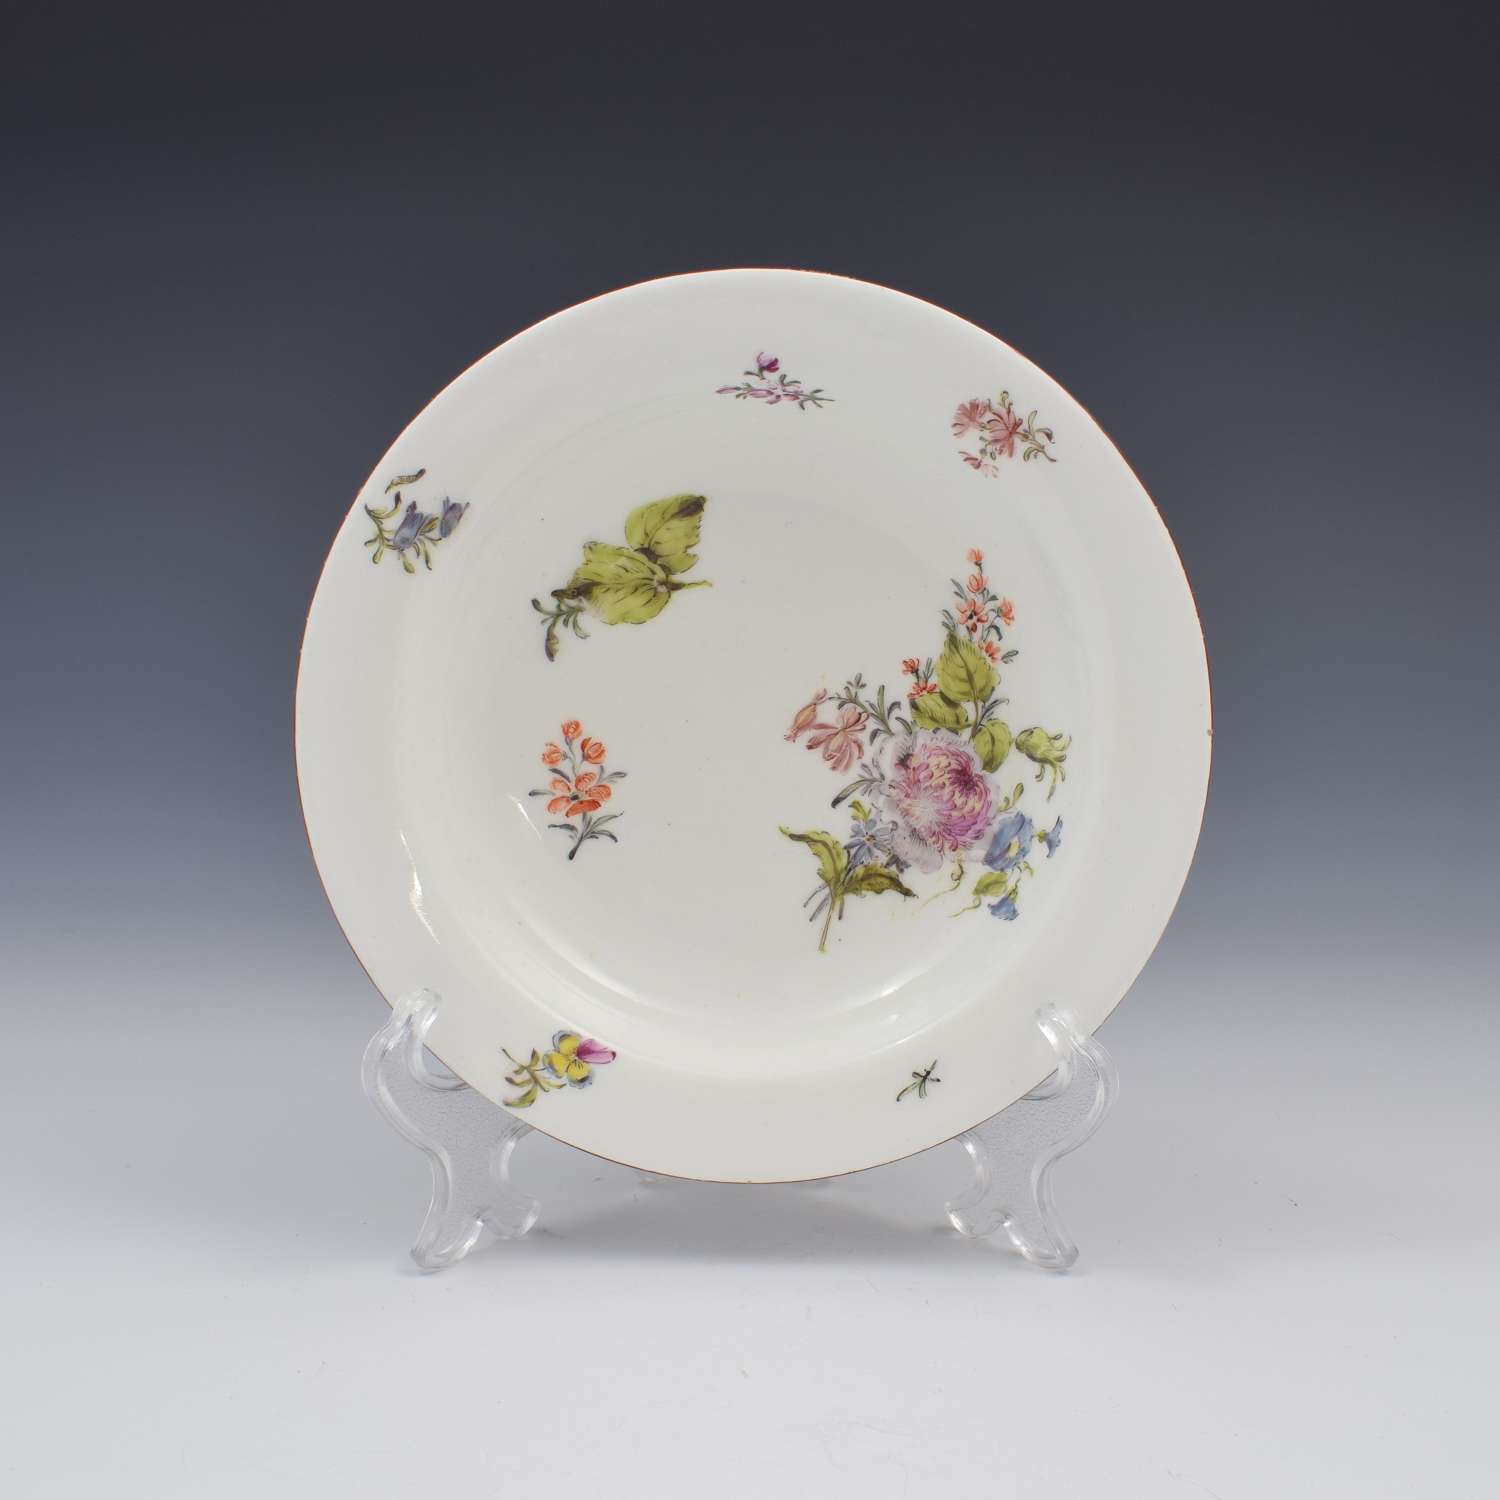 Chelsea Porcelain Red Anchor Period Bowl / Dish c.1755